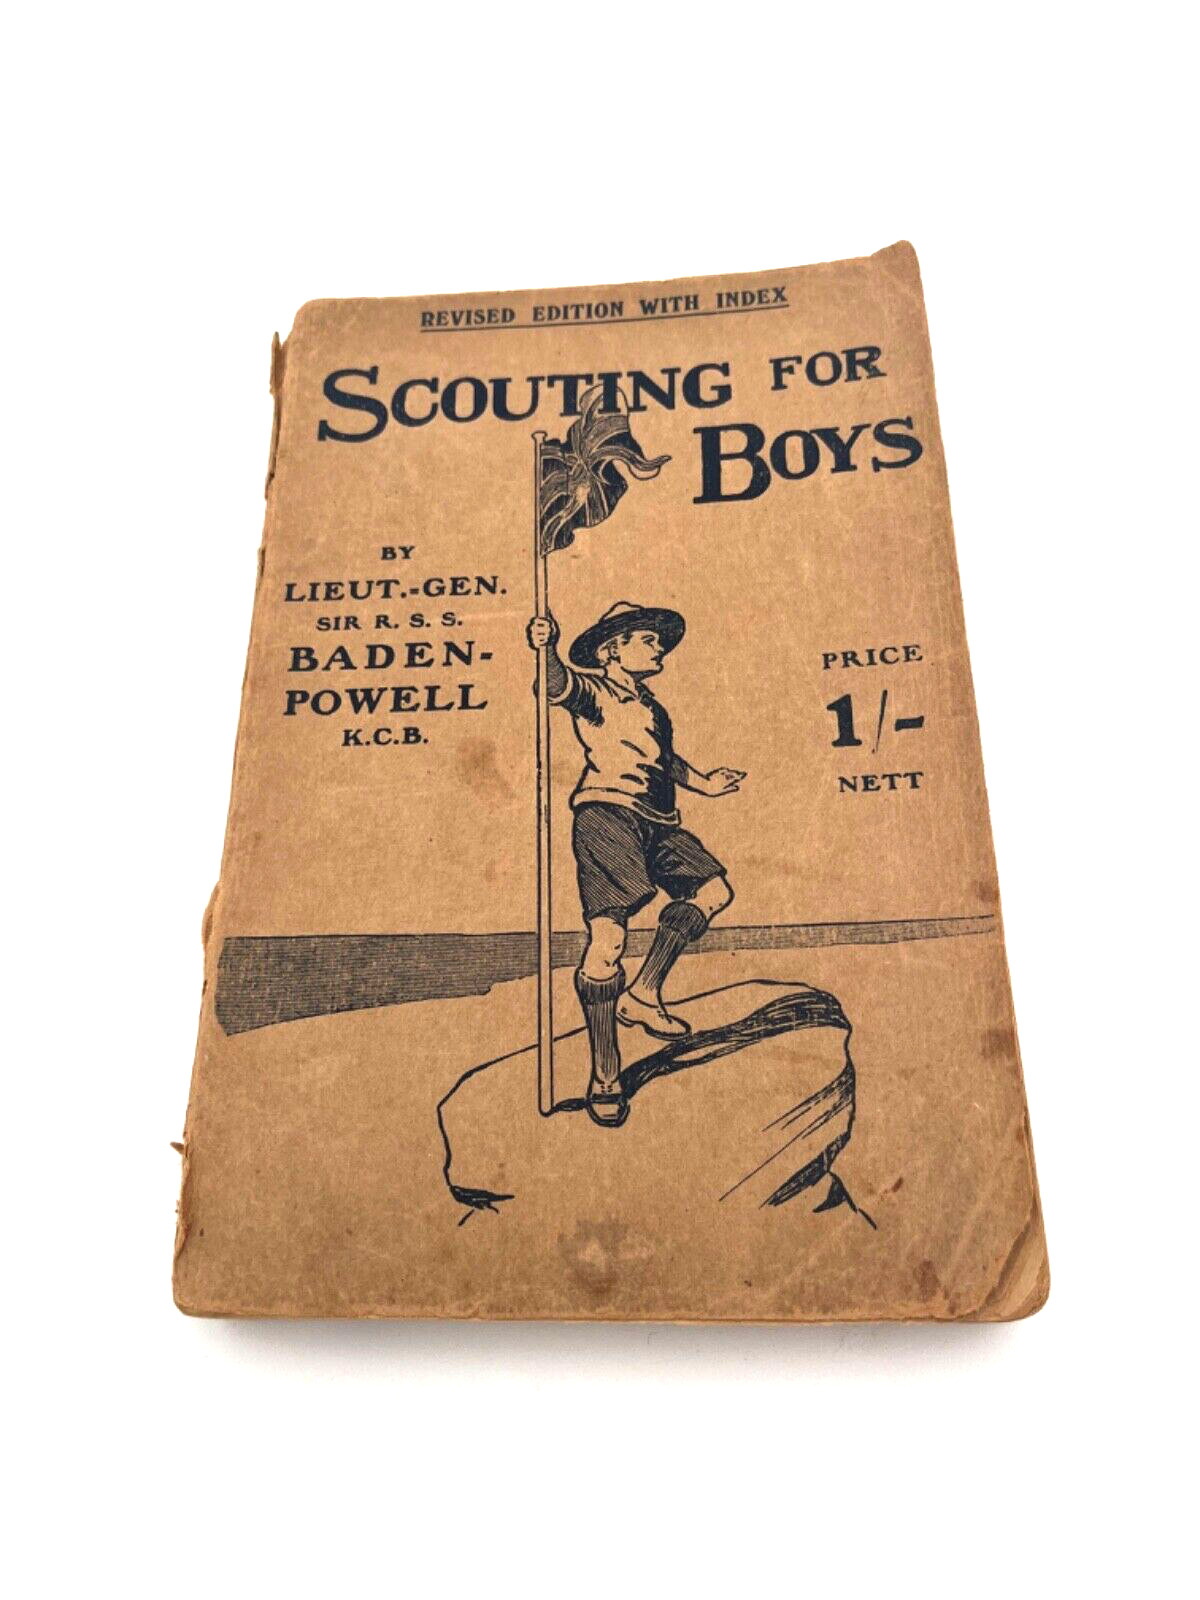 Extremely Rare Scouting for Boys Manual, the very first original 1908 edition